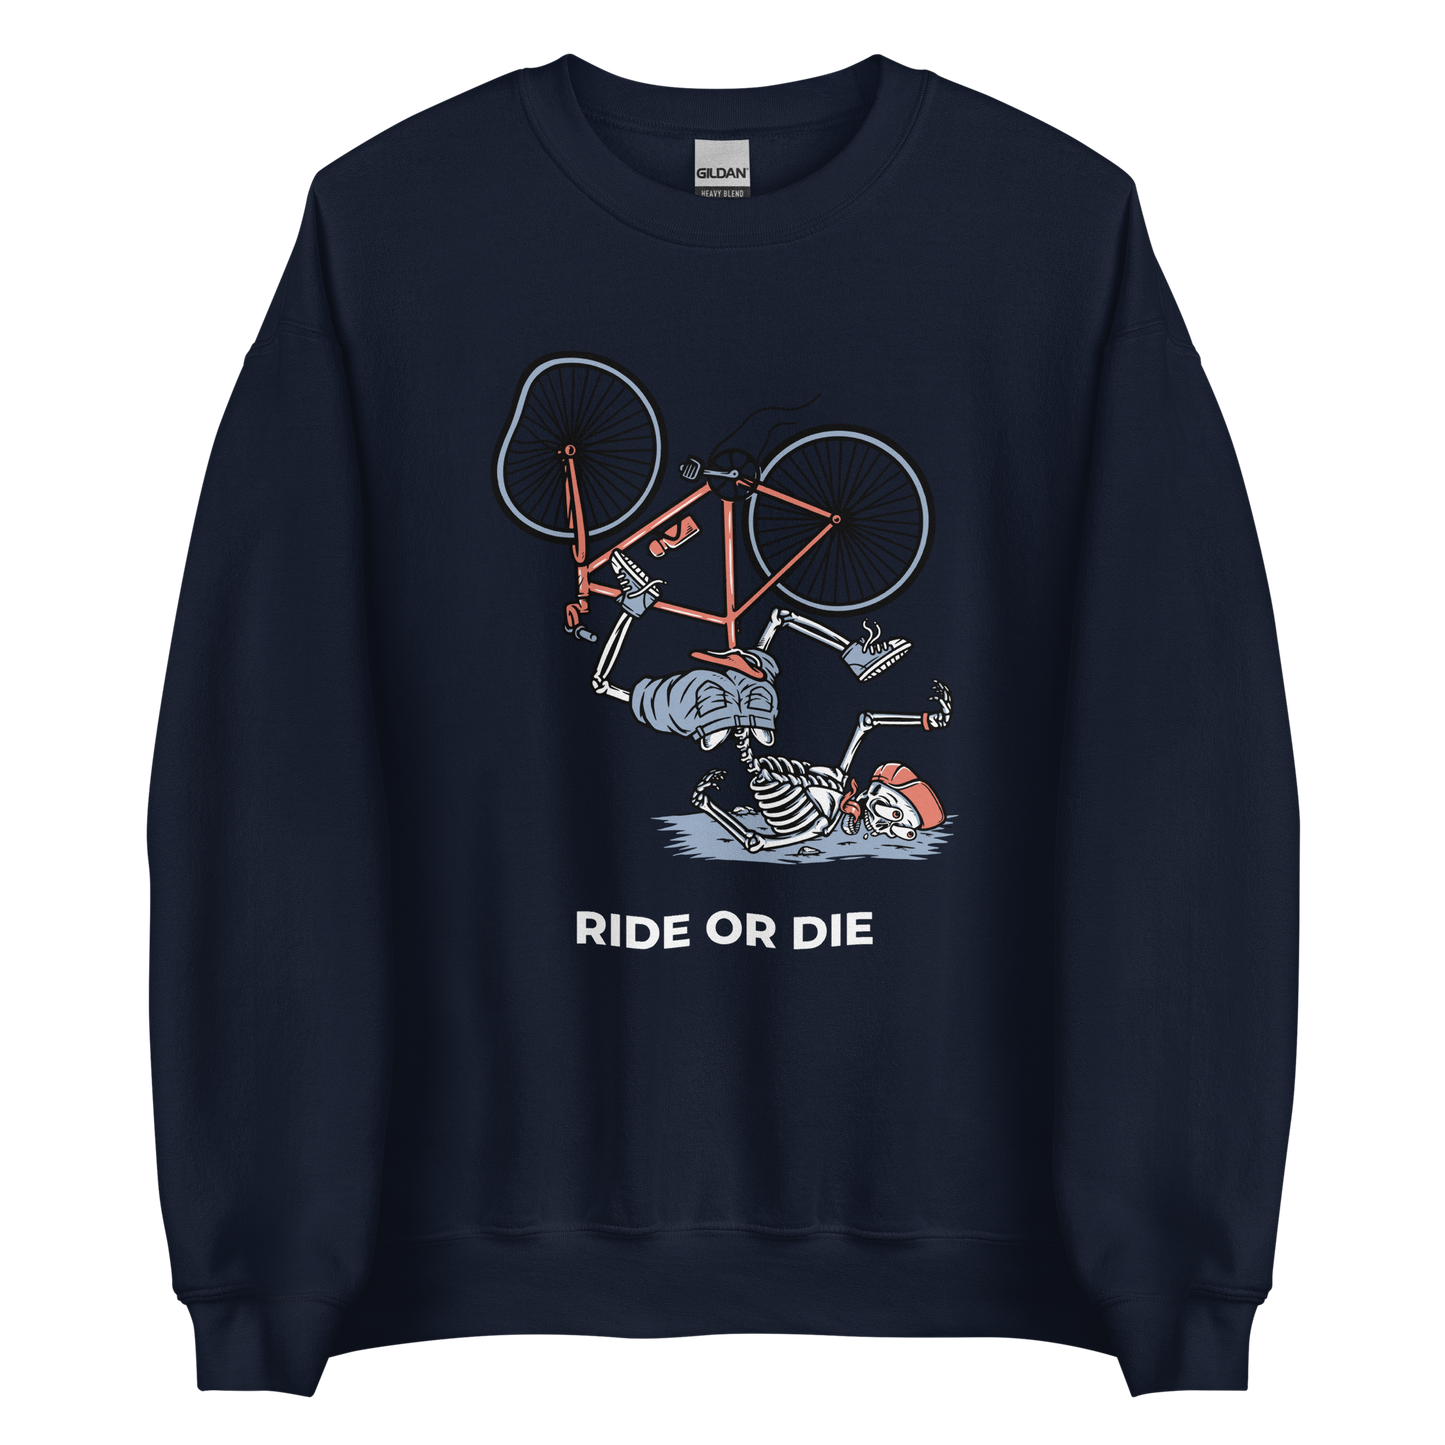 Navy Ride or Die Sweatshirt featuring a bold Skeleton Falling While Riding a Bicycle graphic on the chest - Funny Graphic Skeleton Sweatshirts - Boozy Fox